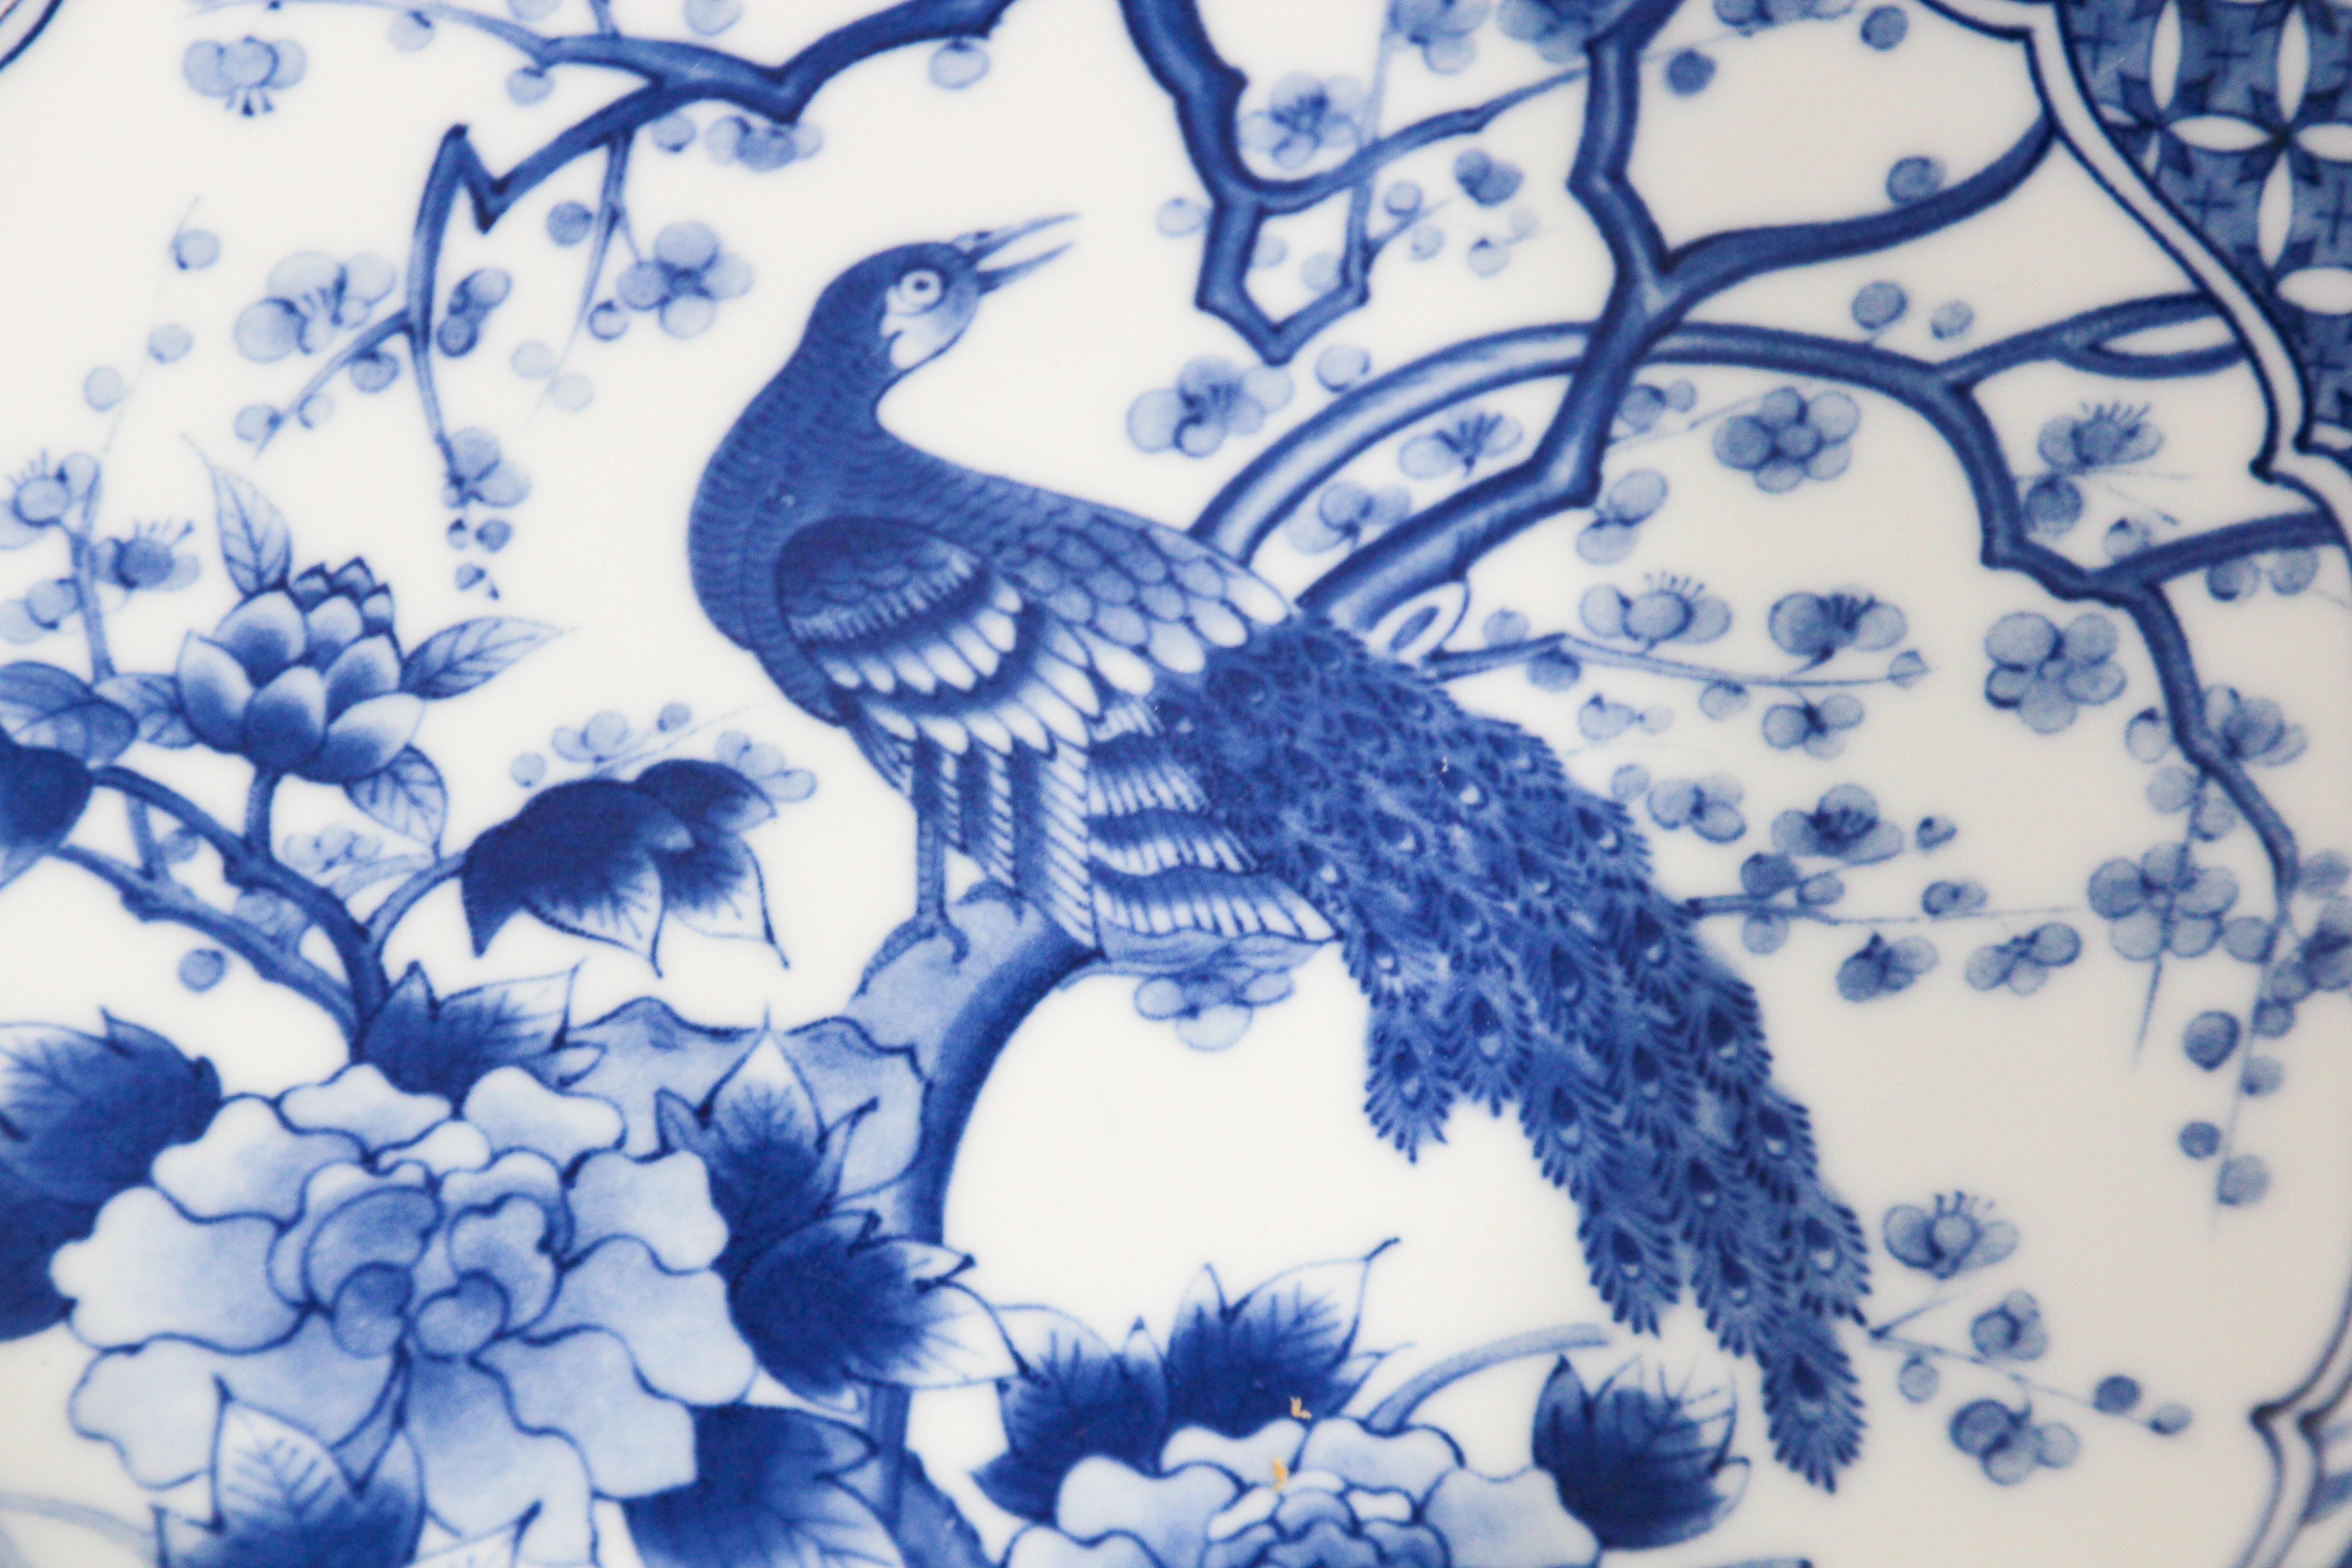 Large Blue and White Porcelain Peacock Bowl Vintage Collectible Japan For Sale 1